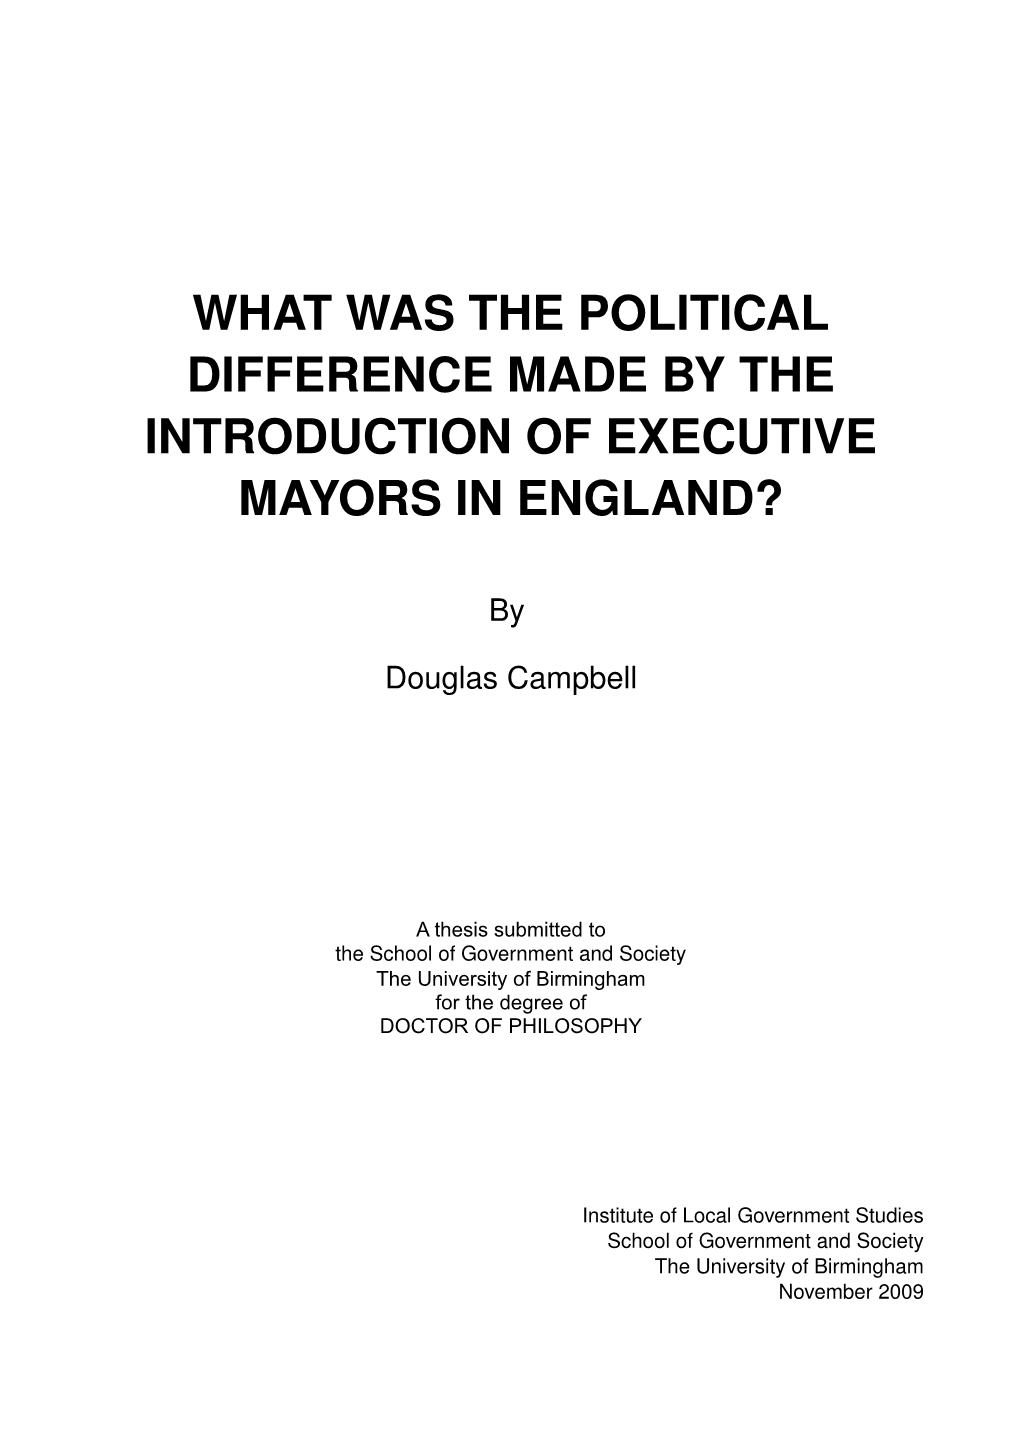 What Was the Political Difference Made by the Introduction of Executive Mayors in England?